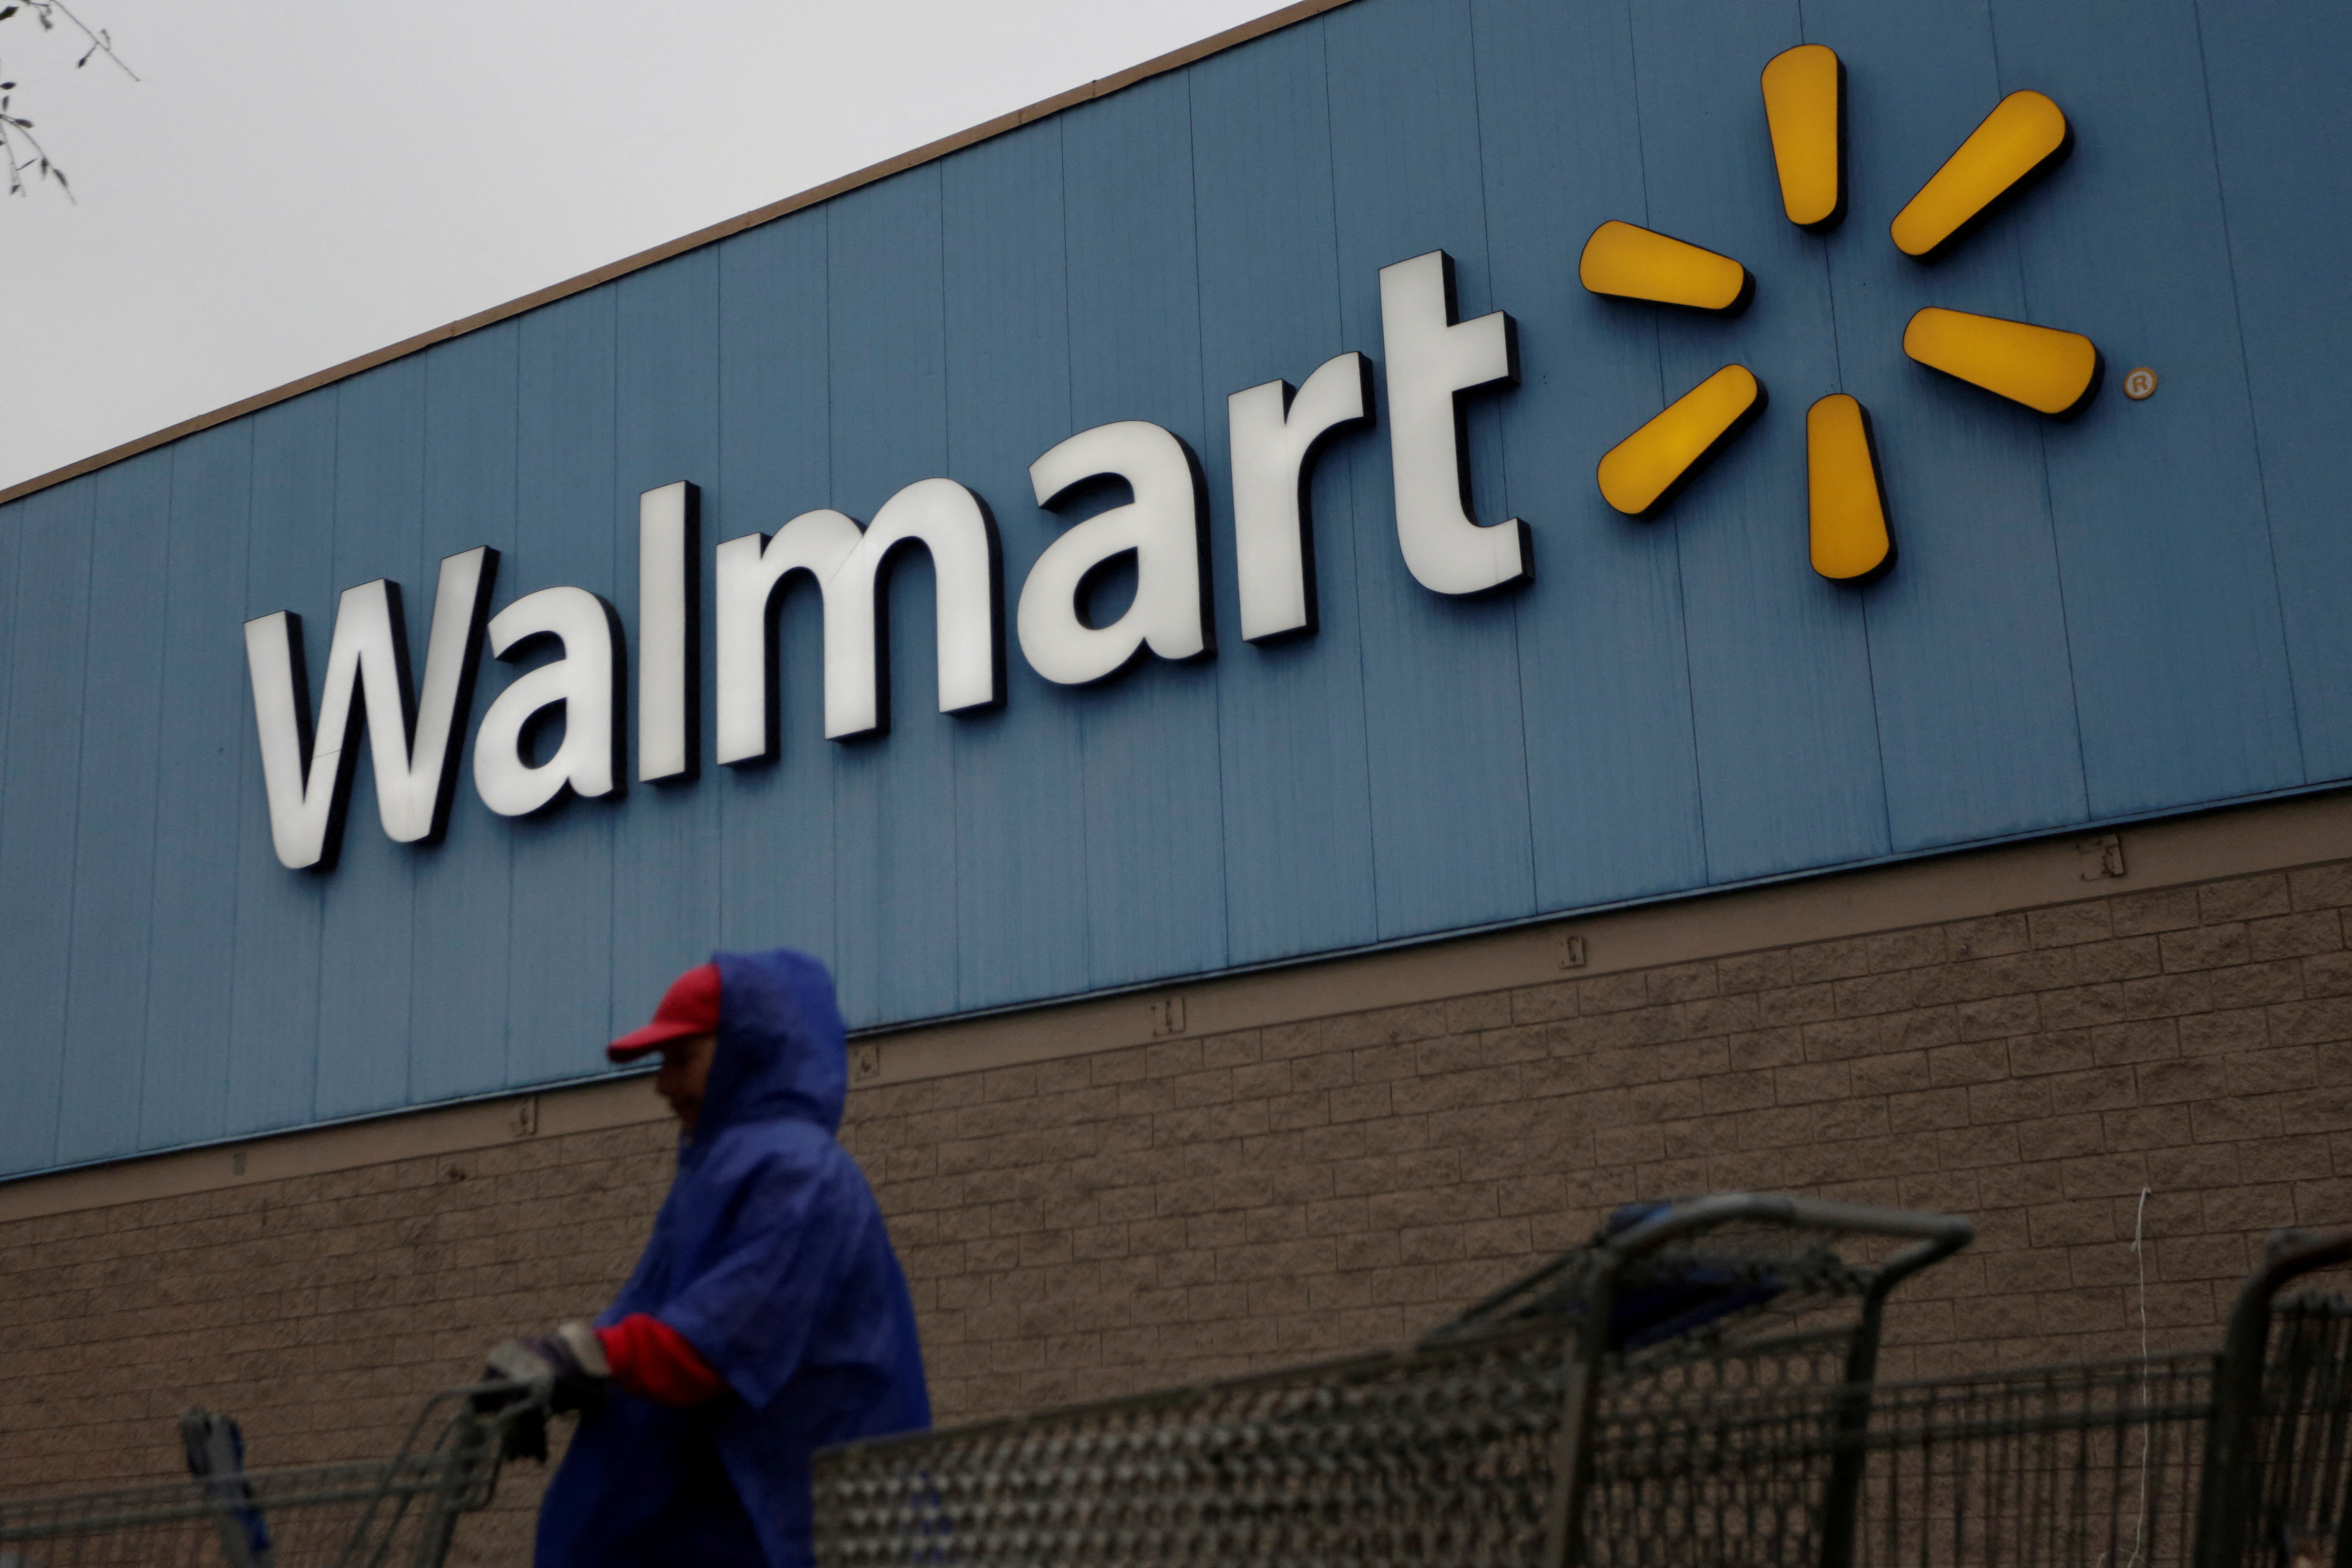 Employee arranges shopping carts in front of the logo of Walmart outside a store in Monterrey